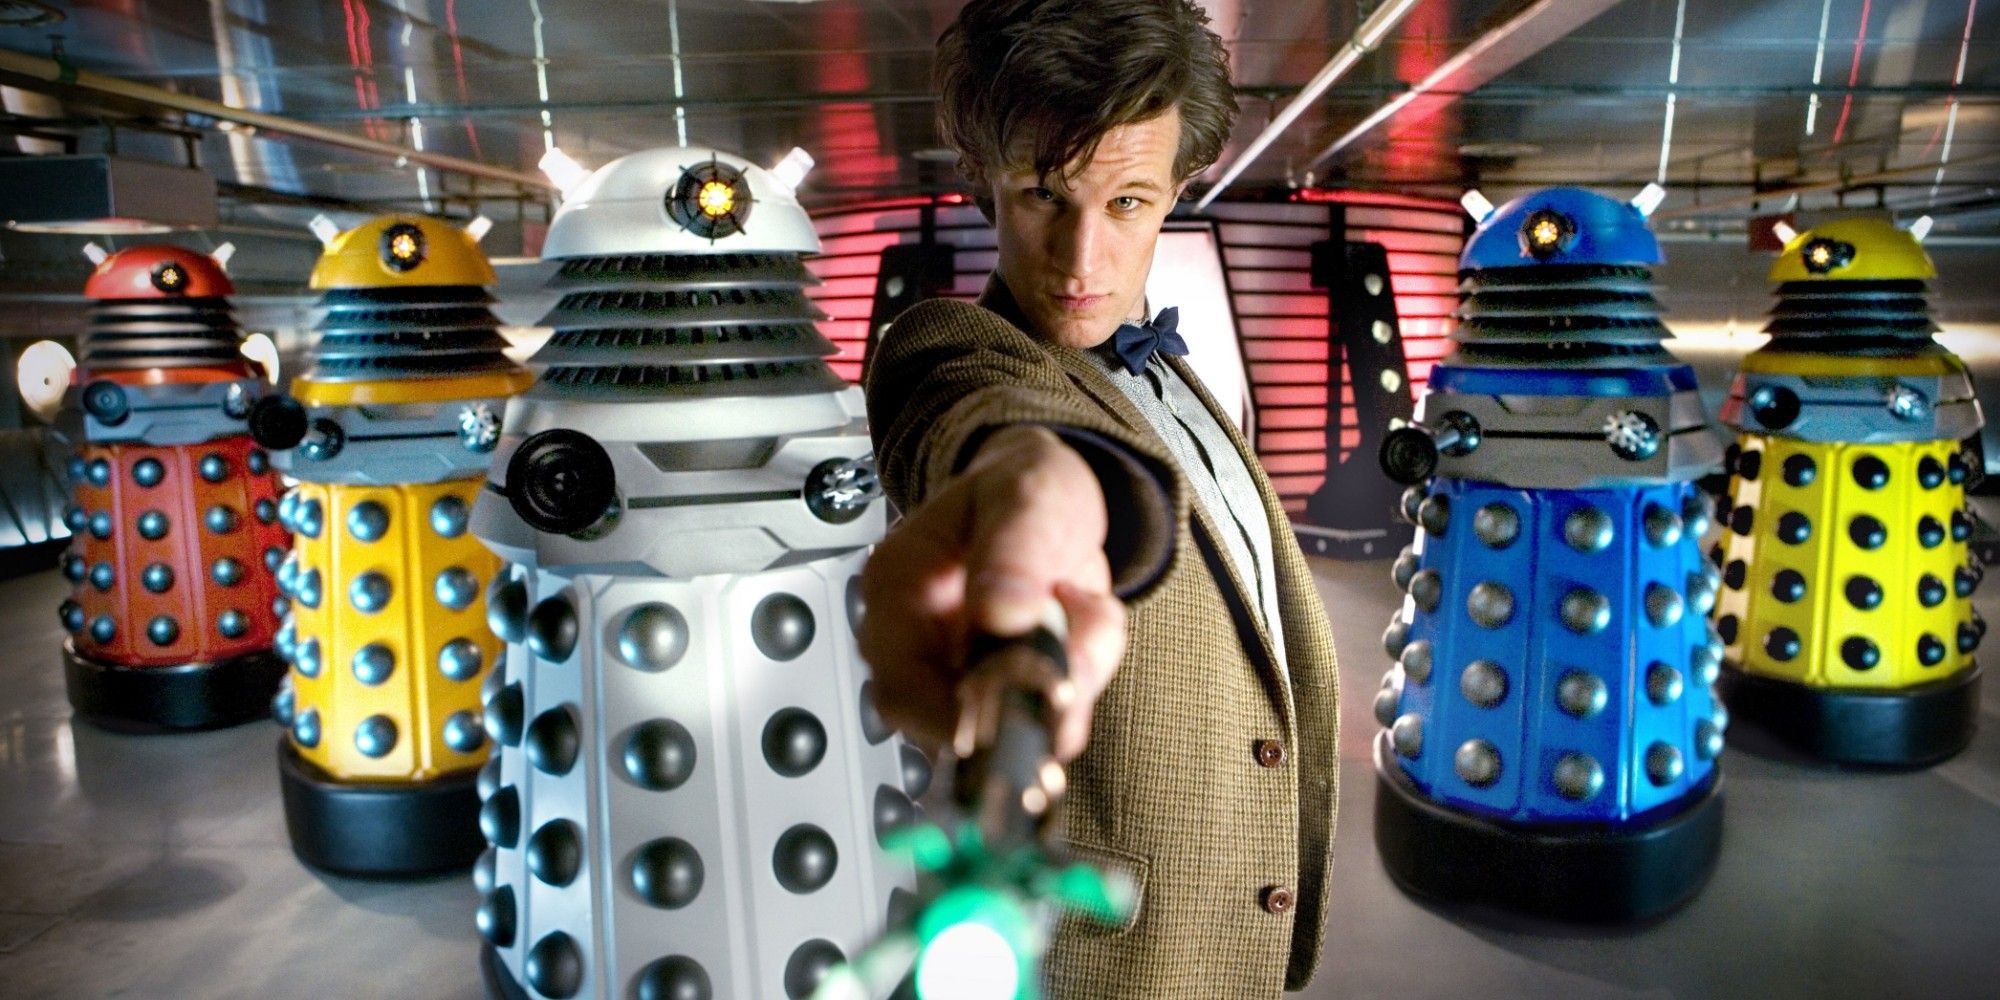 The Doctor poses in front of a row of multicolored Daleks from Doctor Who